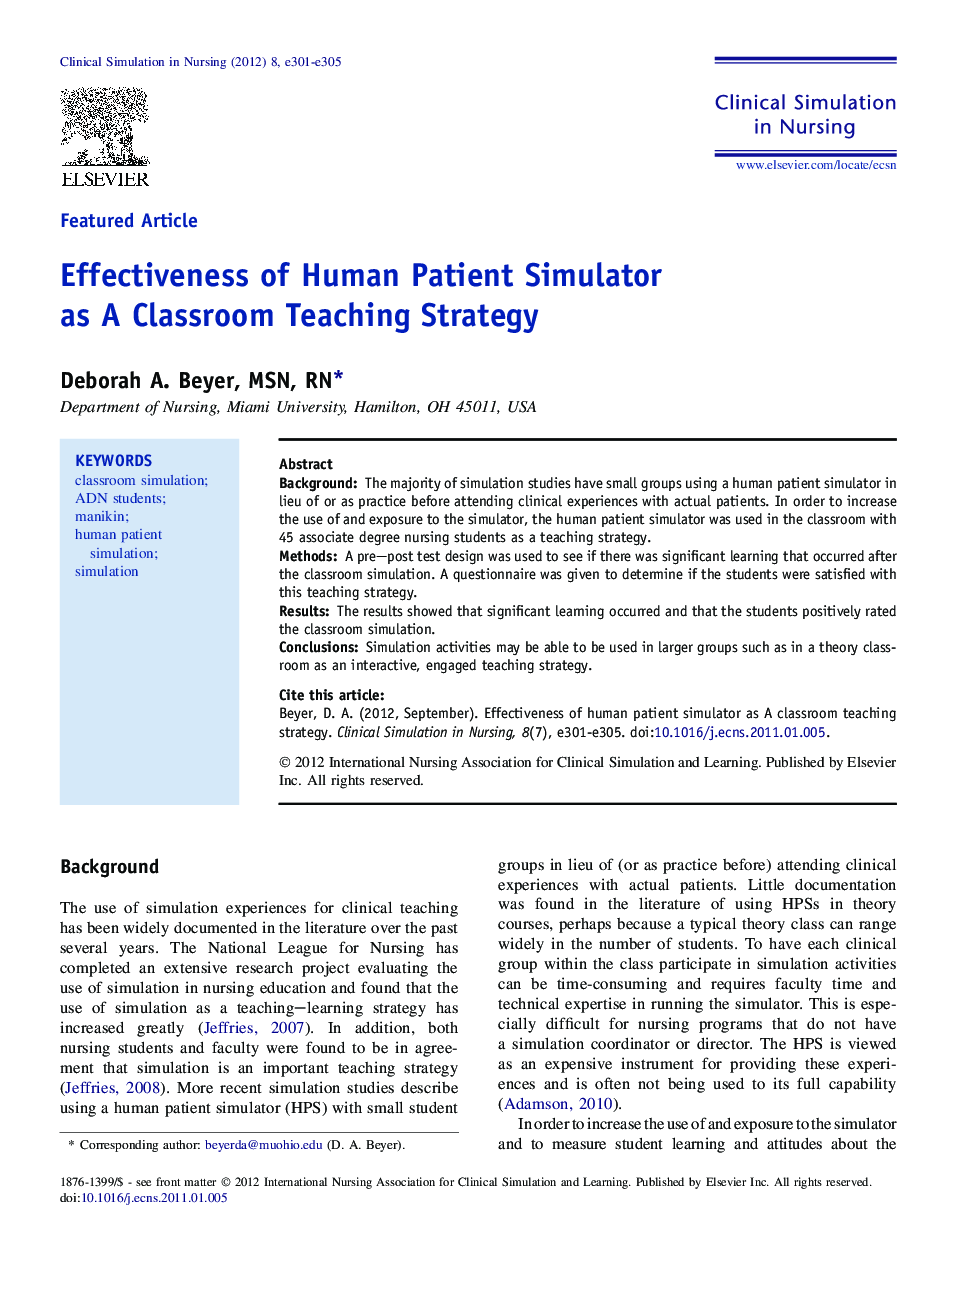 Effectiveness of Human Patient Simulator as A Classroom Teaching Strategy